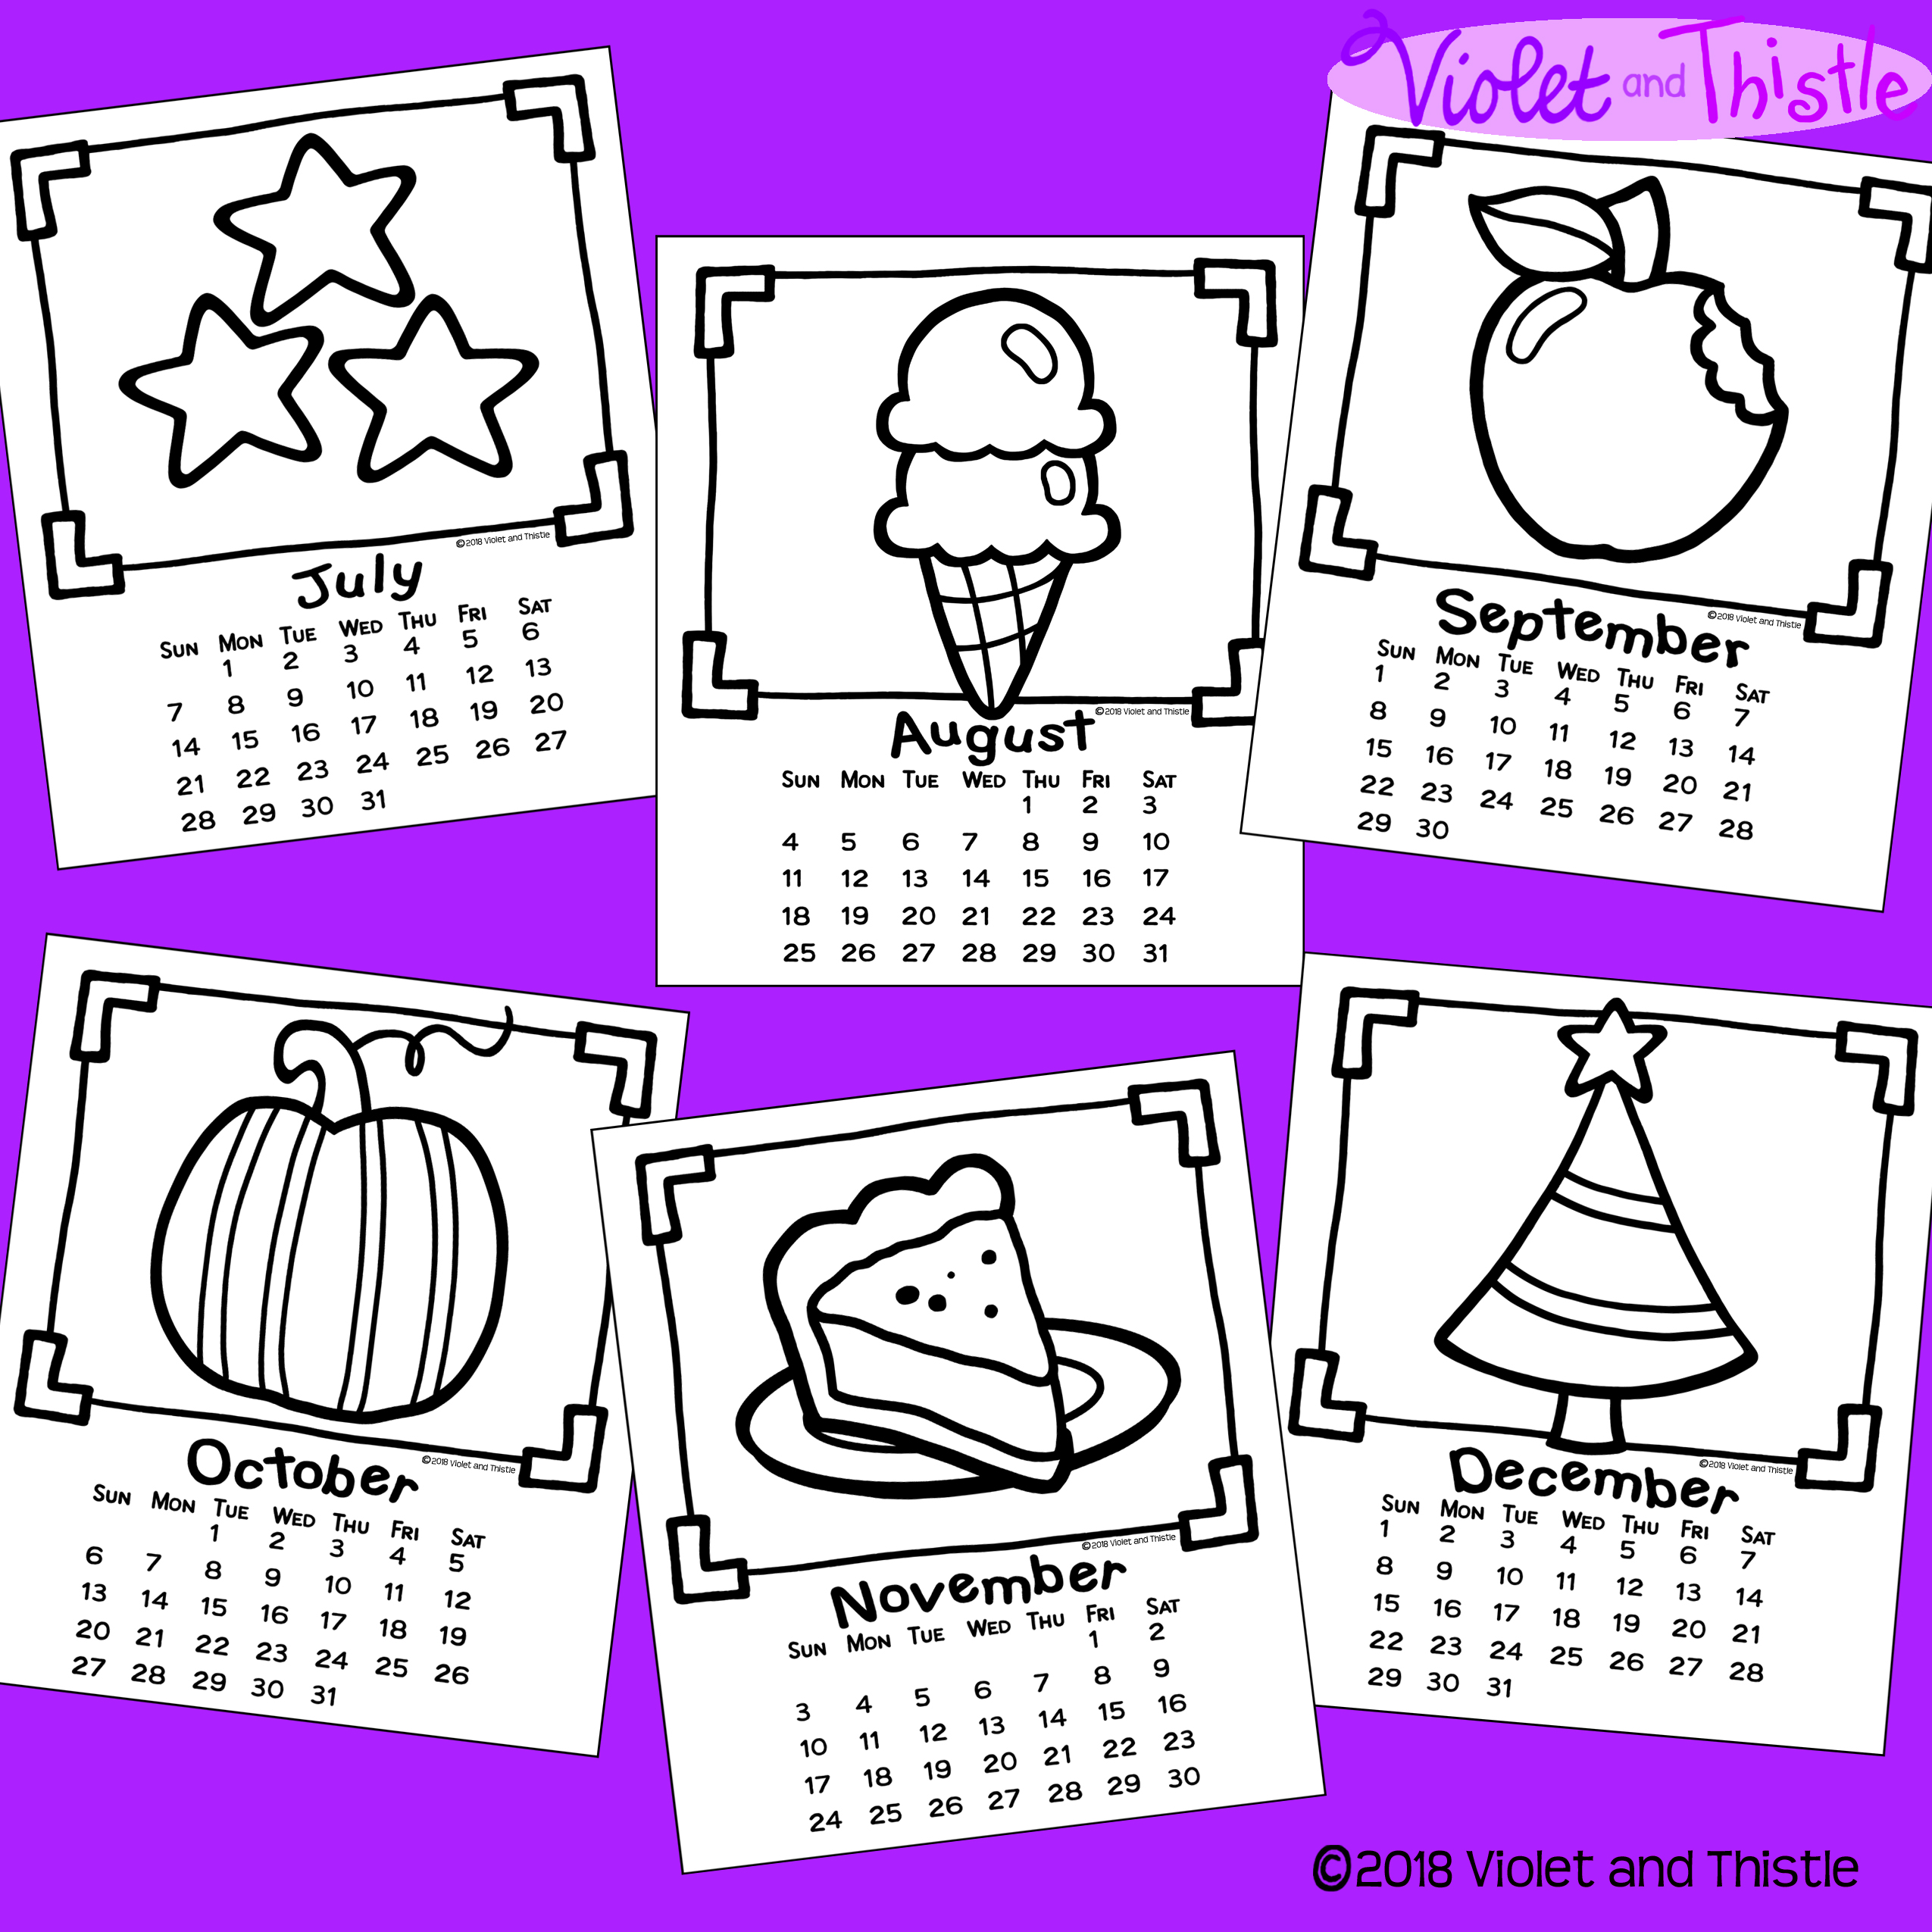 And coloring calendar printable to color parent christmas gift for parent kids made by teachers